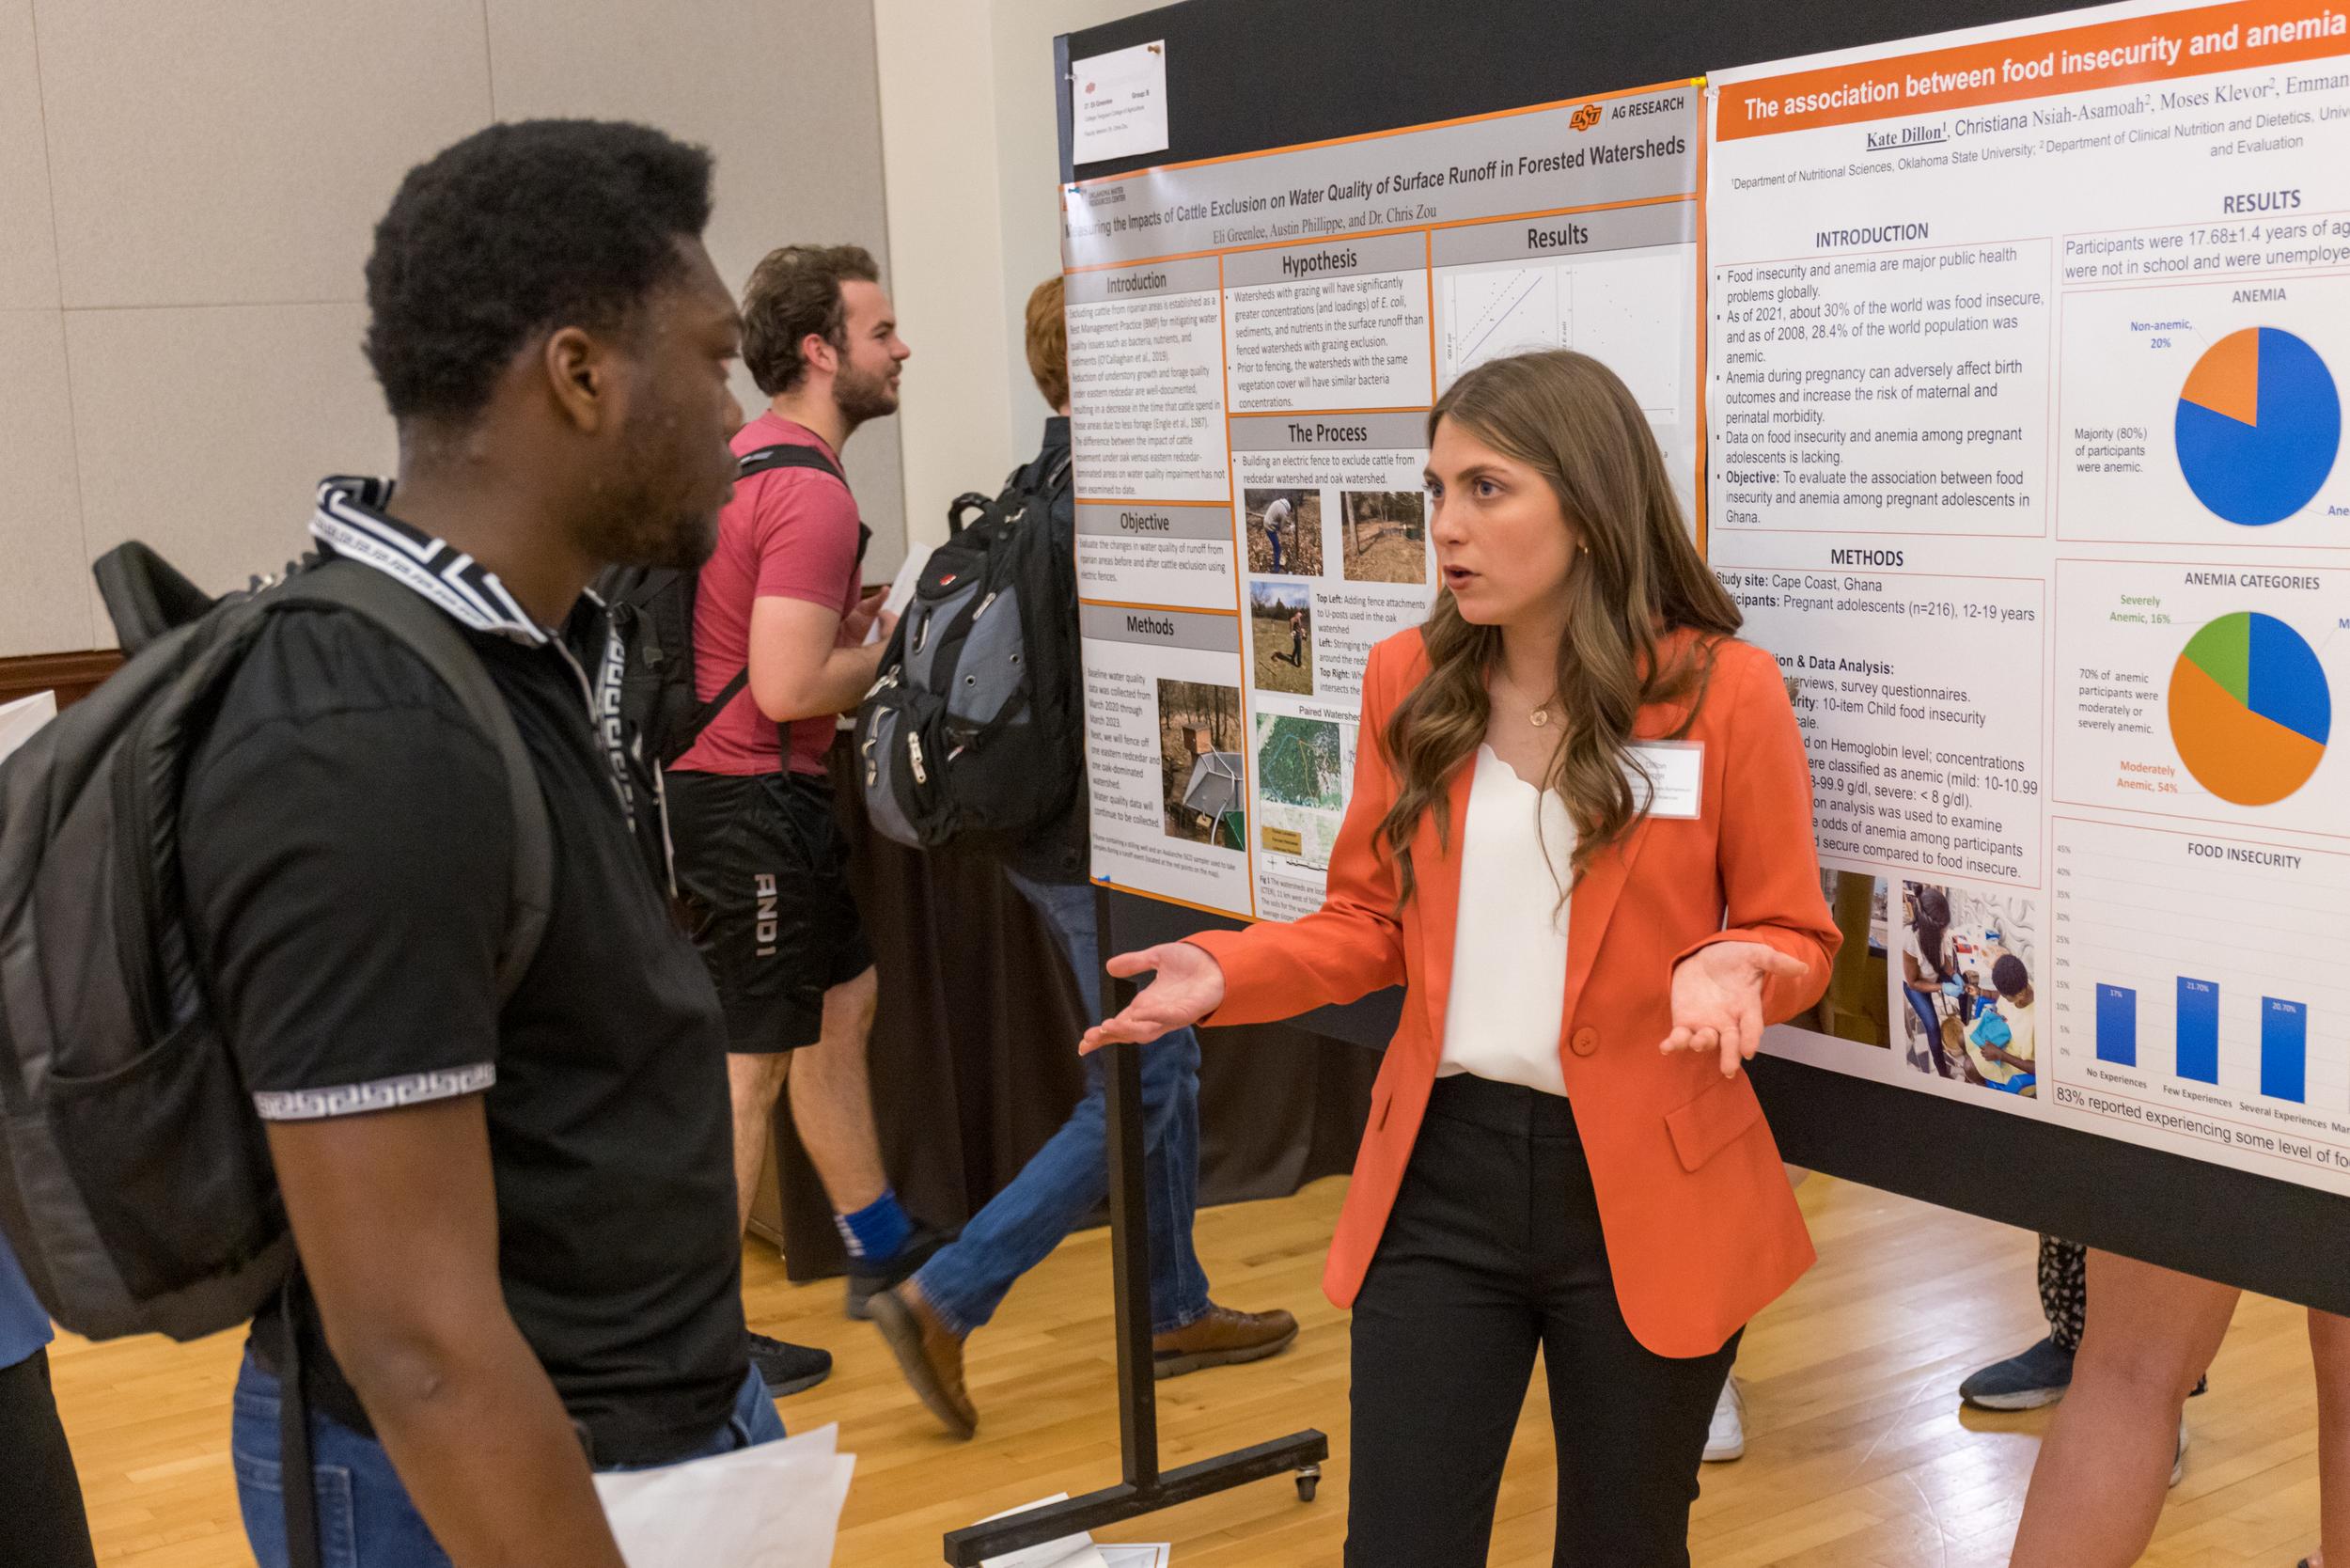 A white female student wearing an orange blazer explains her research poster to symposium attendees.